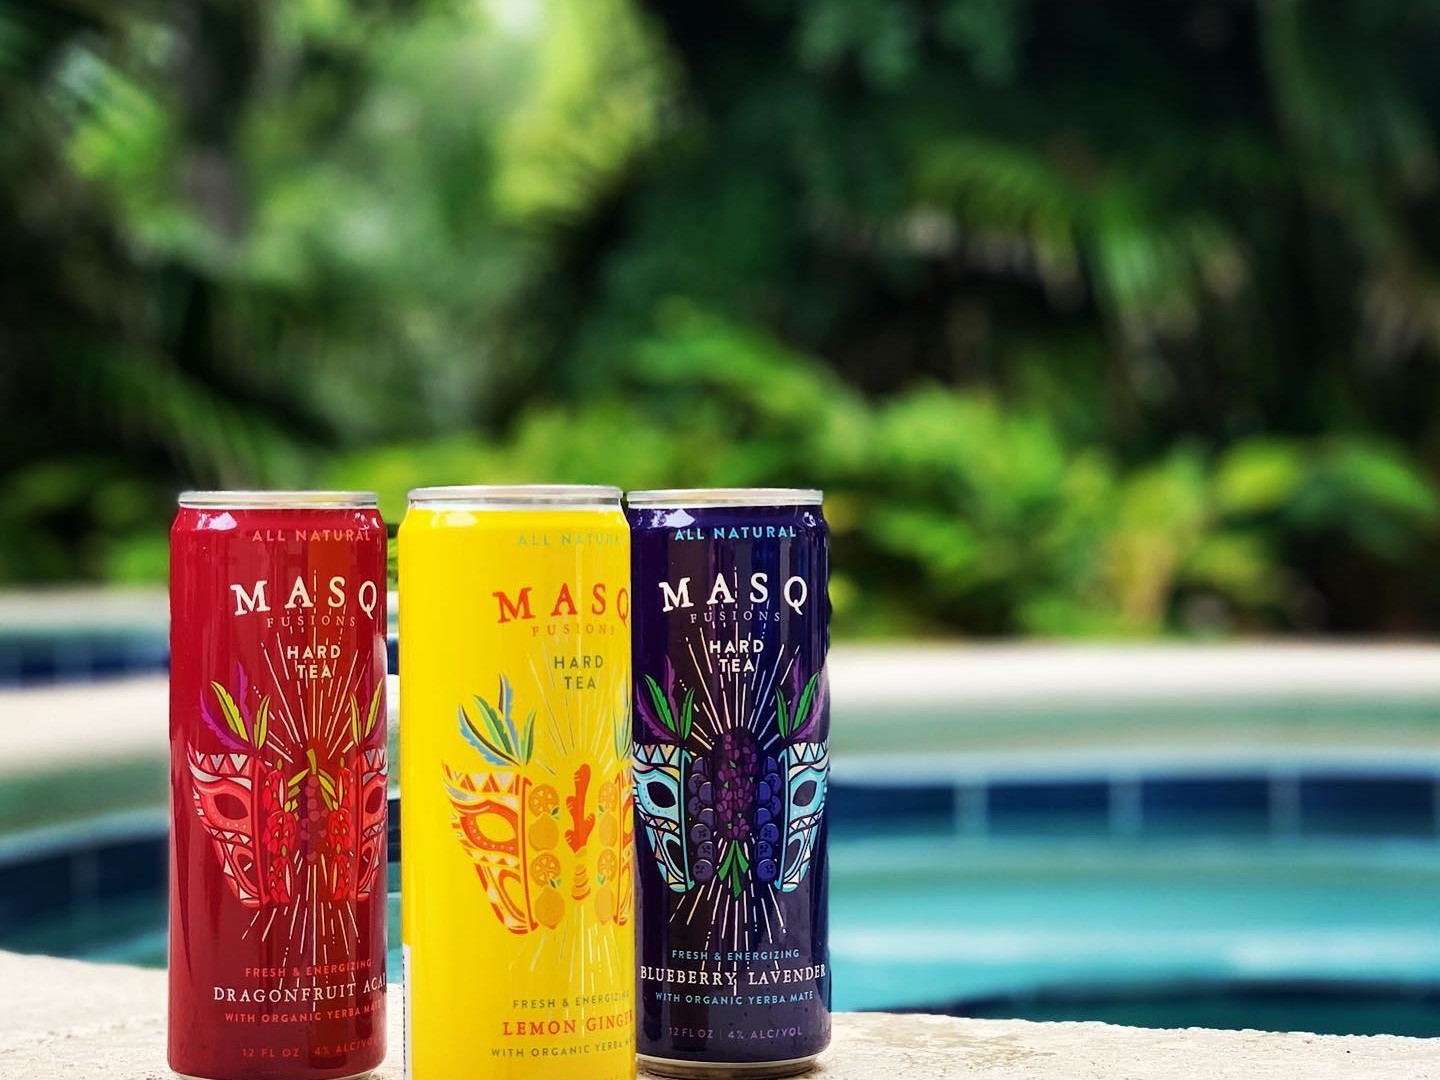 Masq Fusions – Hard Tea that Supports a Healthy Lifestyle